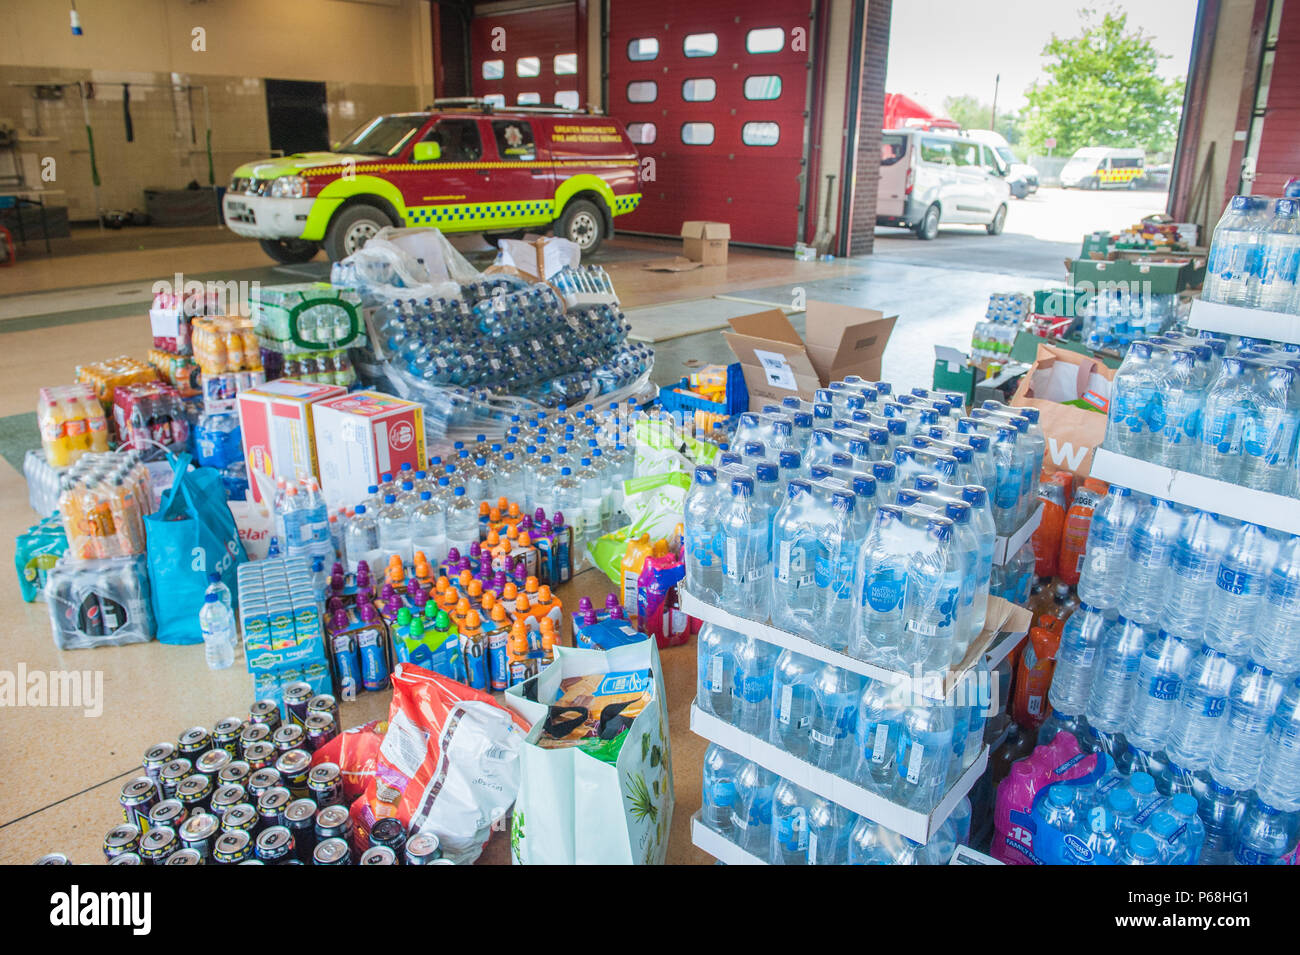 Stalybridge Fire Station, Greater Manchester, UK. 29th June, 2018. Supplies including water and food given by the public and local businesses for the needs of firefighters tackling the huge blaze on Saddleworth Moor, at Stalybridge Fire Station, Greater Manchester on Friday 29th June 2018. Credit: Matthew Wilkinson/Alamy Live News Stock Photo